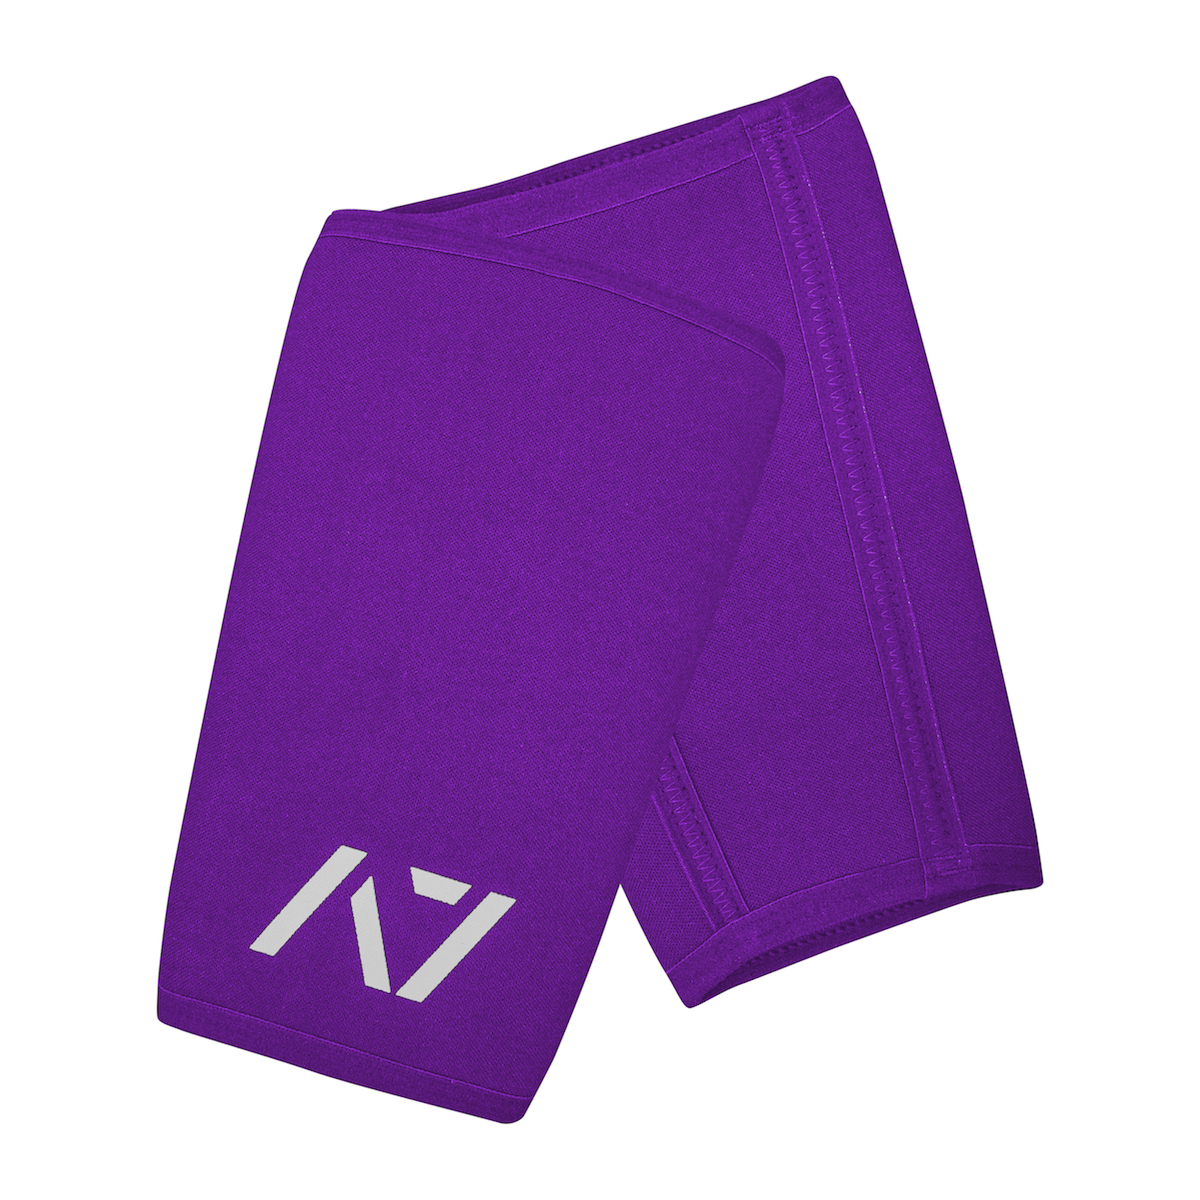 A7 IPF approved Purple CONE knee sleeves are structured with a downward cut panel on the back of the quad and calf to ensure ultimate compression at the knee joint. A7 CONE knee sleeves are IPF approved for use in all powerlifting competitions. A7 cone knee sleeves are made with high quality neoprene and the knee sleeves are sold as a pair. The double seem on the knee sleeves create a greater tension on the knee joint. Available in UK and Europe including France, Italy, Germany, Sweden and Poland